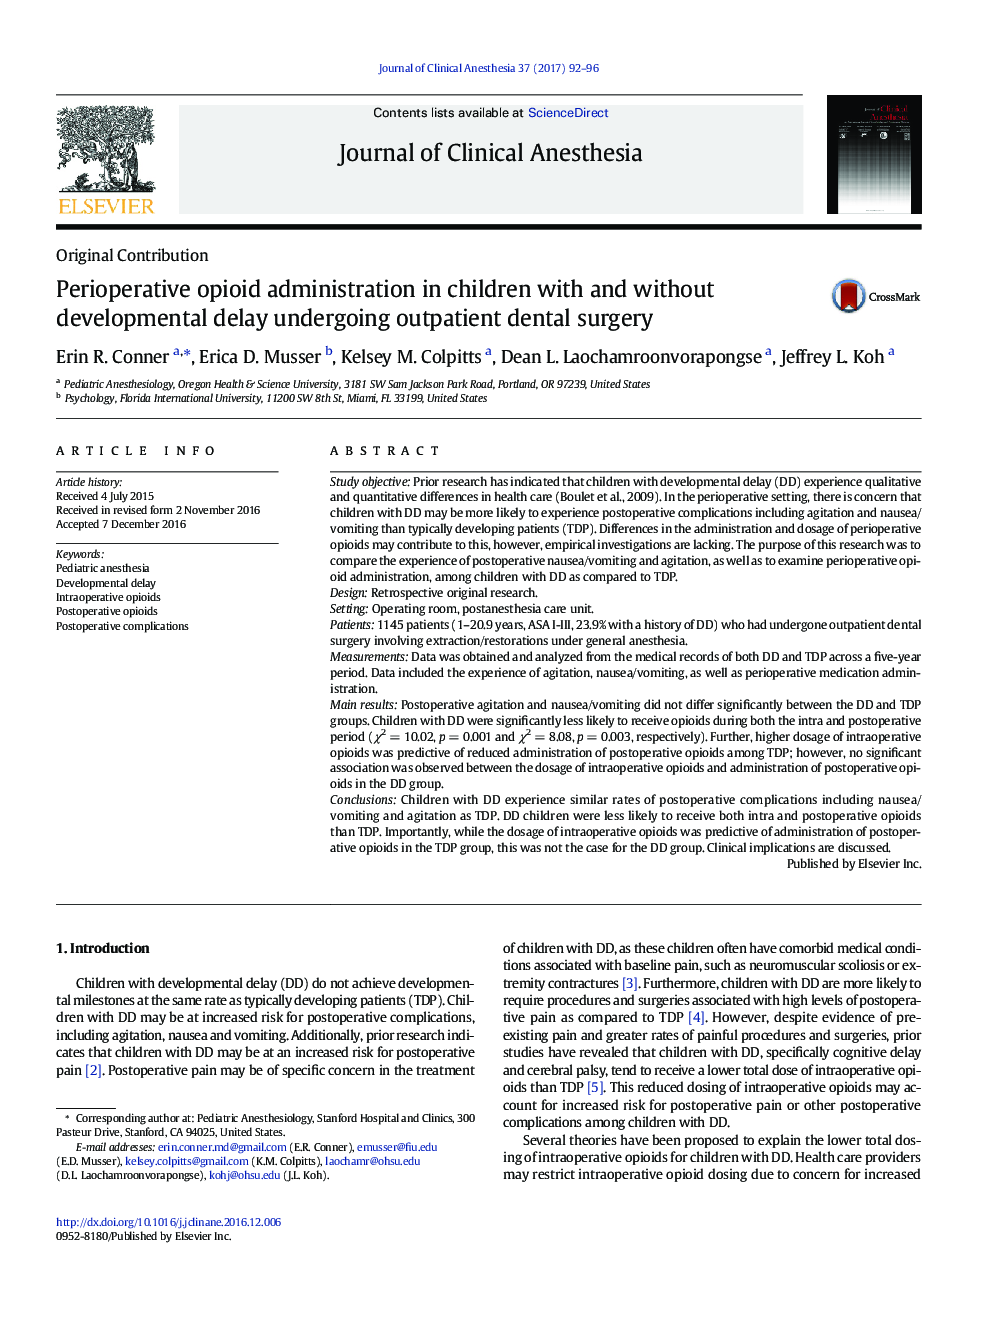 Perioperative opioid administration in children with and without developmental delay undergoing outpatient dental surgery